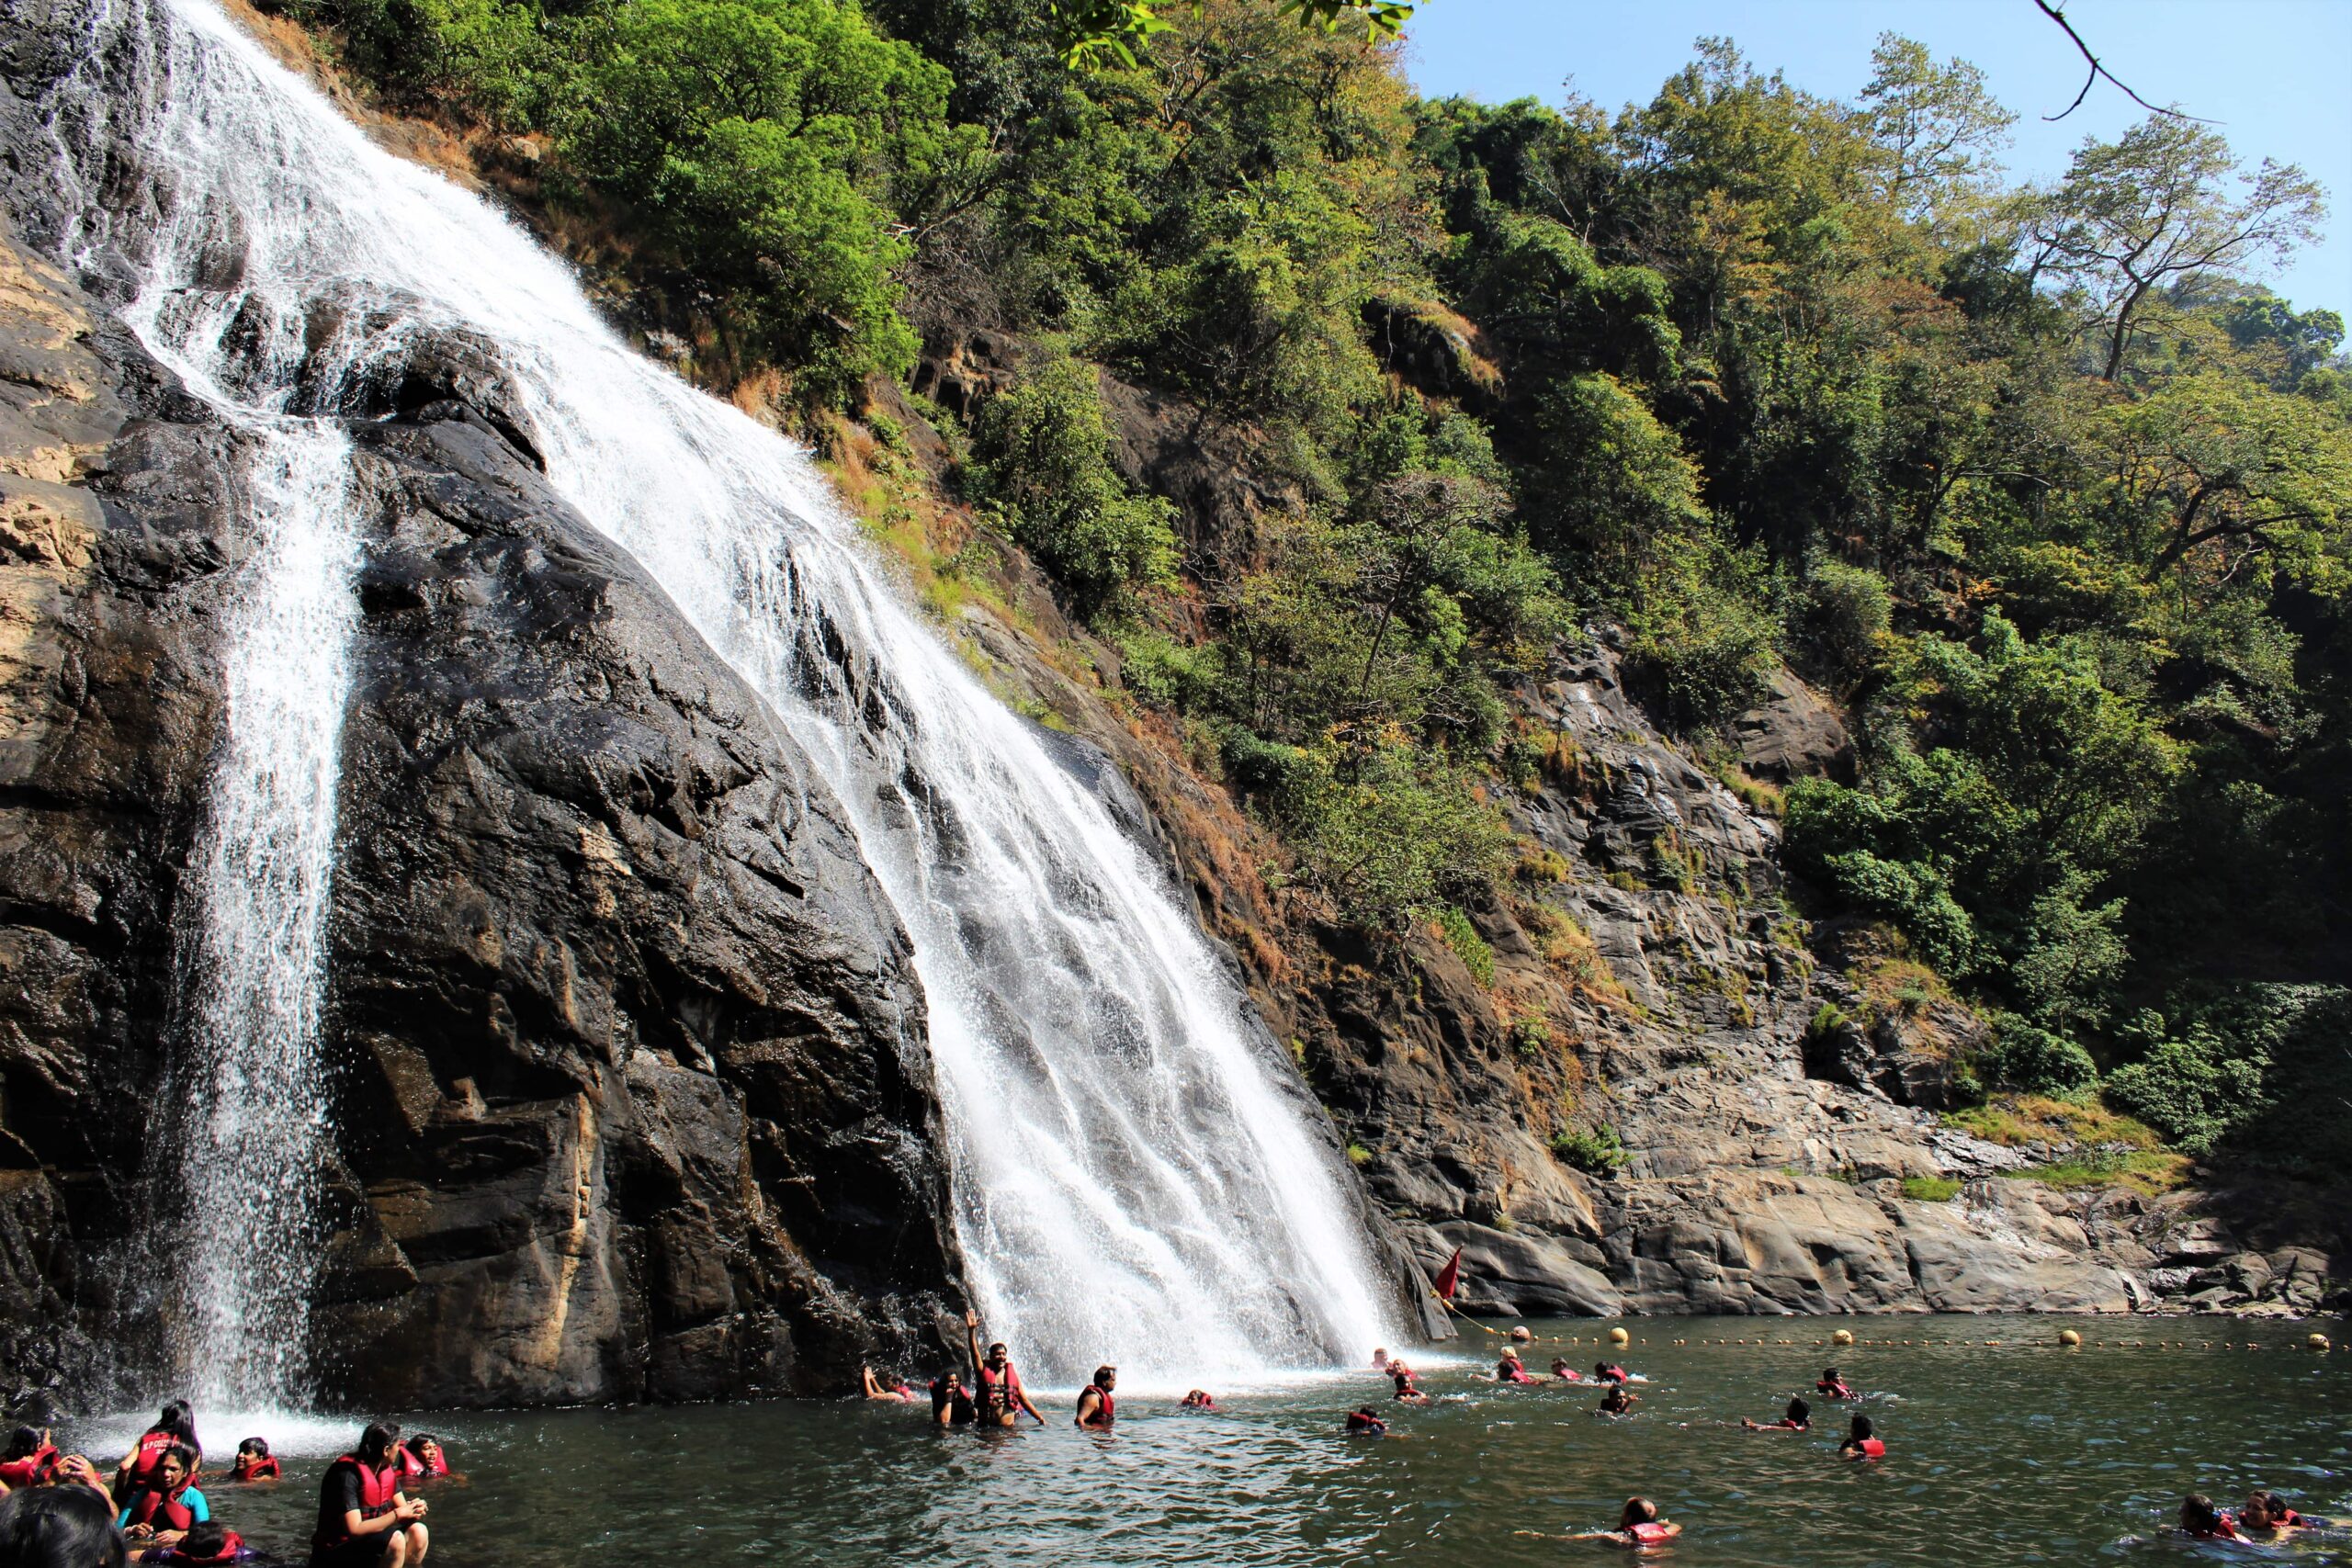 The Falls created a Natural Pool where people are allowed to swim